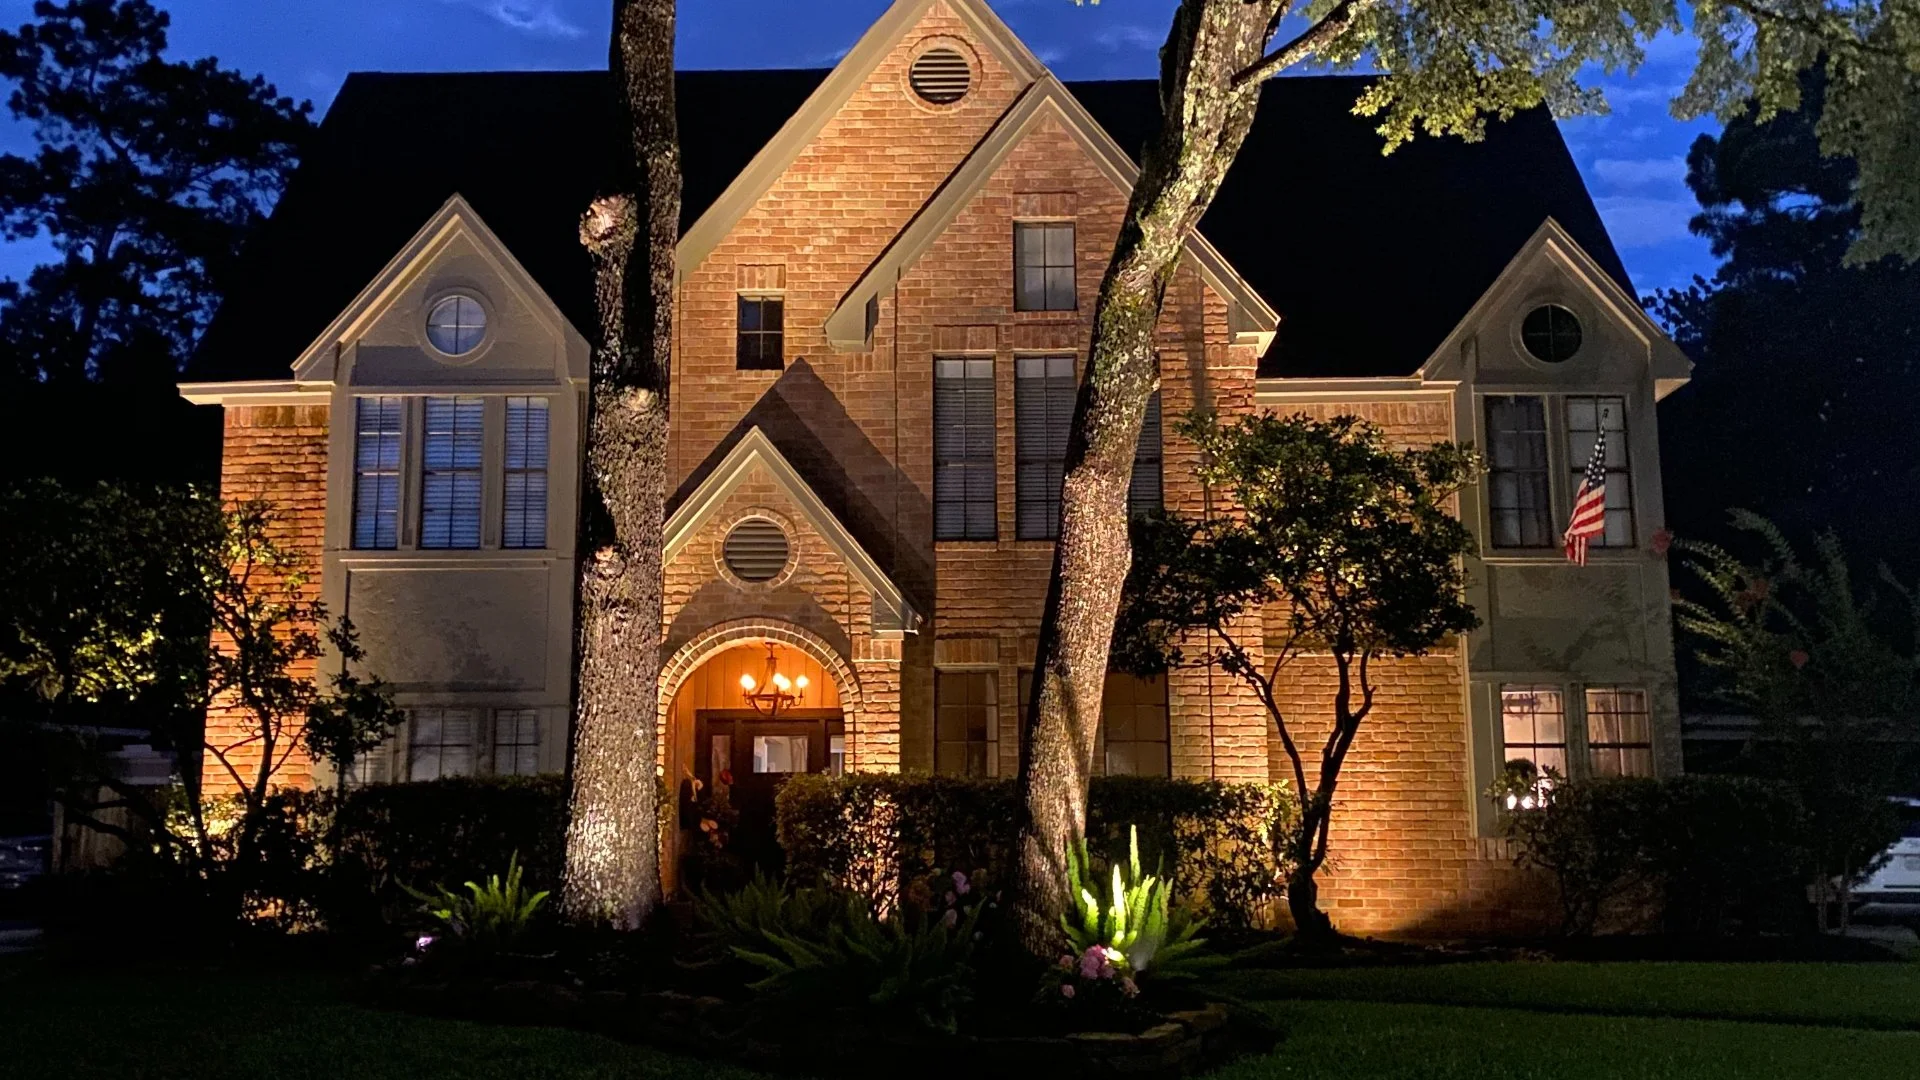 Landscape Lighting 101 - Save Yourself Money & Headaches With These Tips!